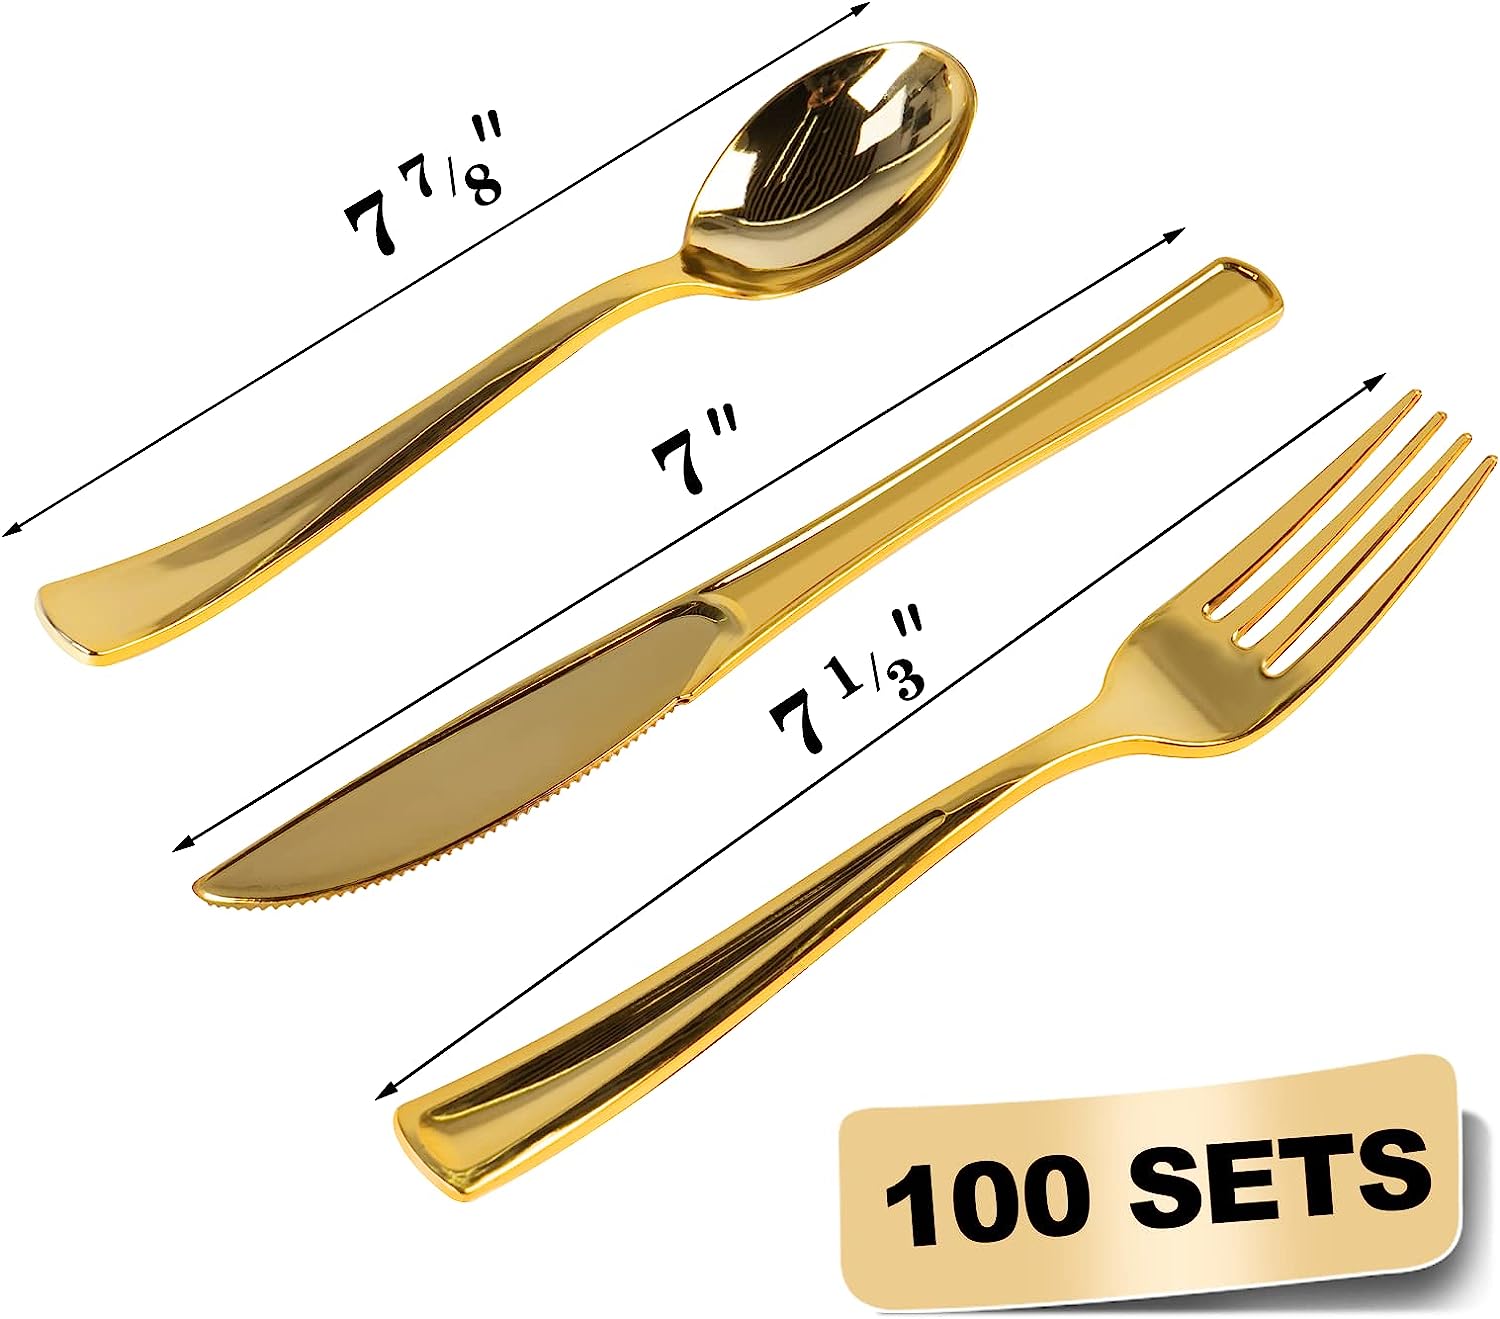 600 Pieces Gold Disposable Plates for 100 Guests, Plastic Plates for Party, Wedding, Dinnerware Set of 100 Dinner Plates, 100 Salad Plates, 100 Spoons, 100 Forks, 100 Knives, 100 Cups